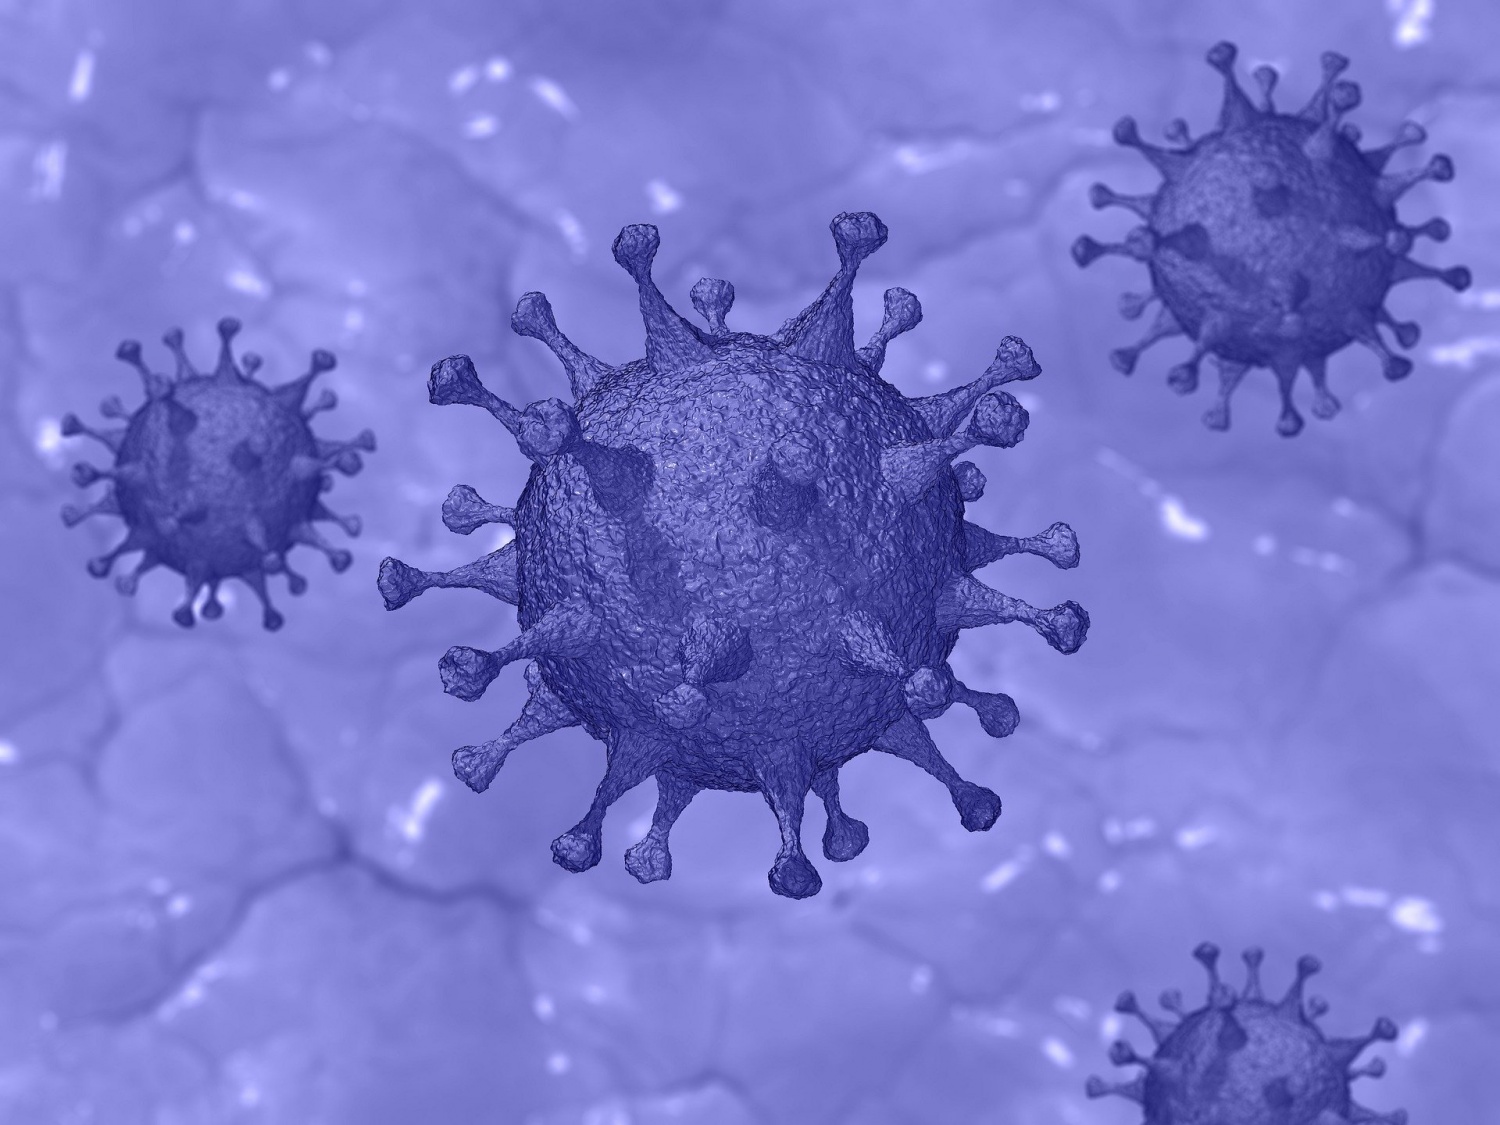 New Coronavirus Study Says the Virus Can Stay Alive for Three Hours up to Three Days, Is 